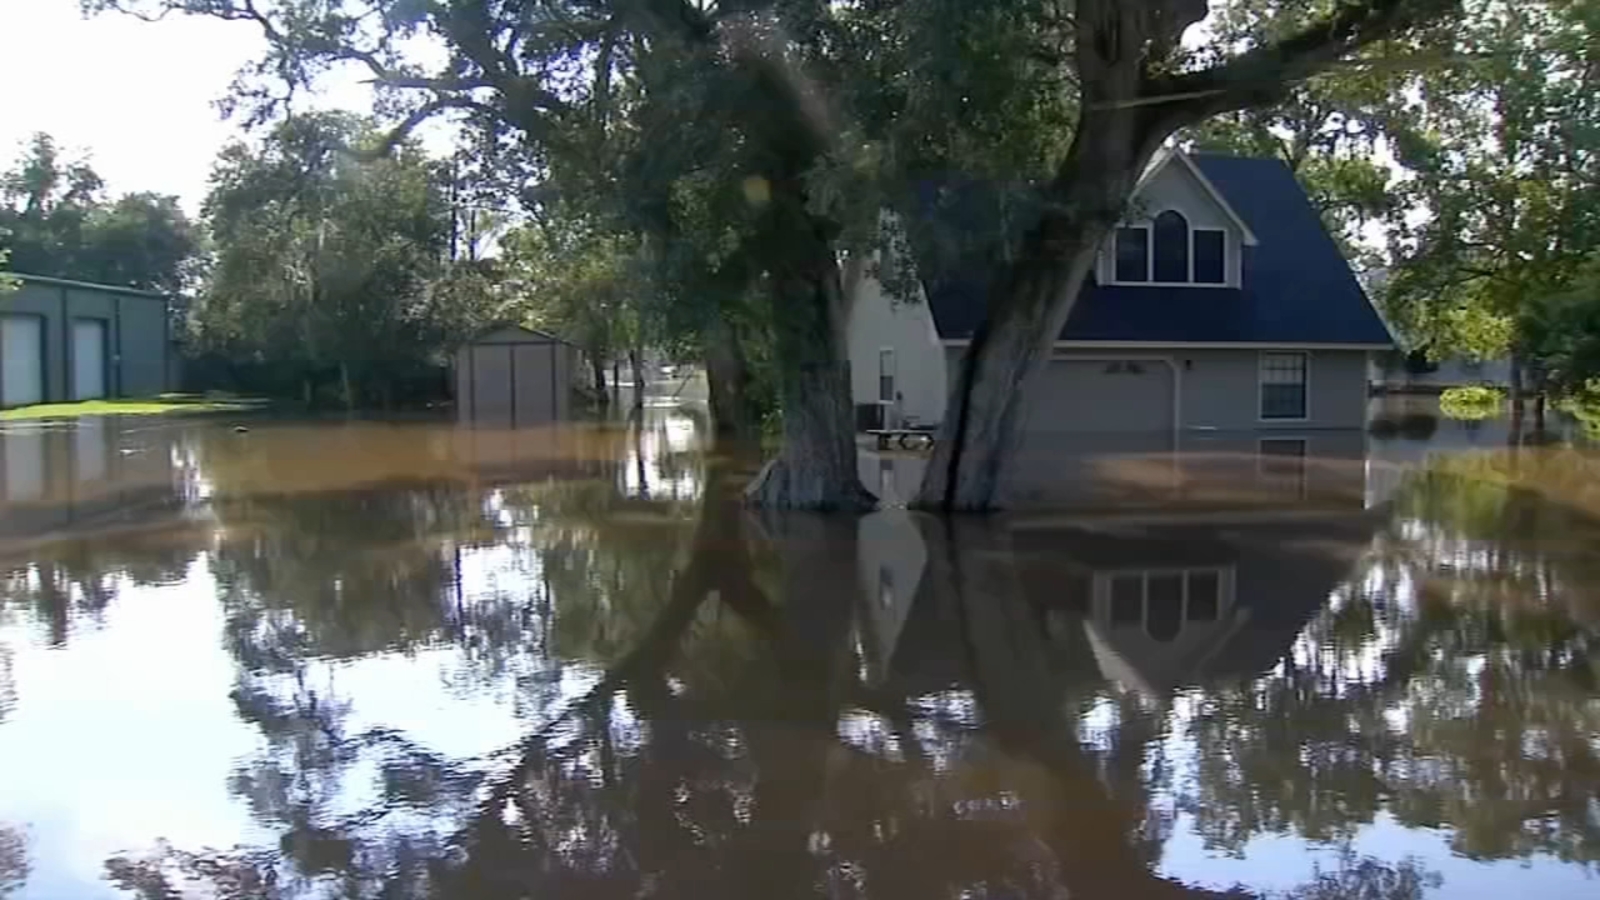 Houston-area homeowners say insurance companies are denying their coverage ahead of hurricane season [Video]